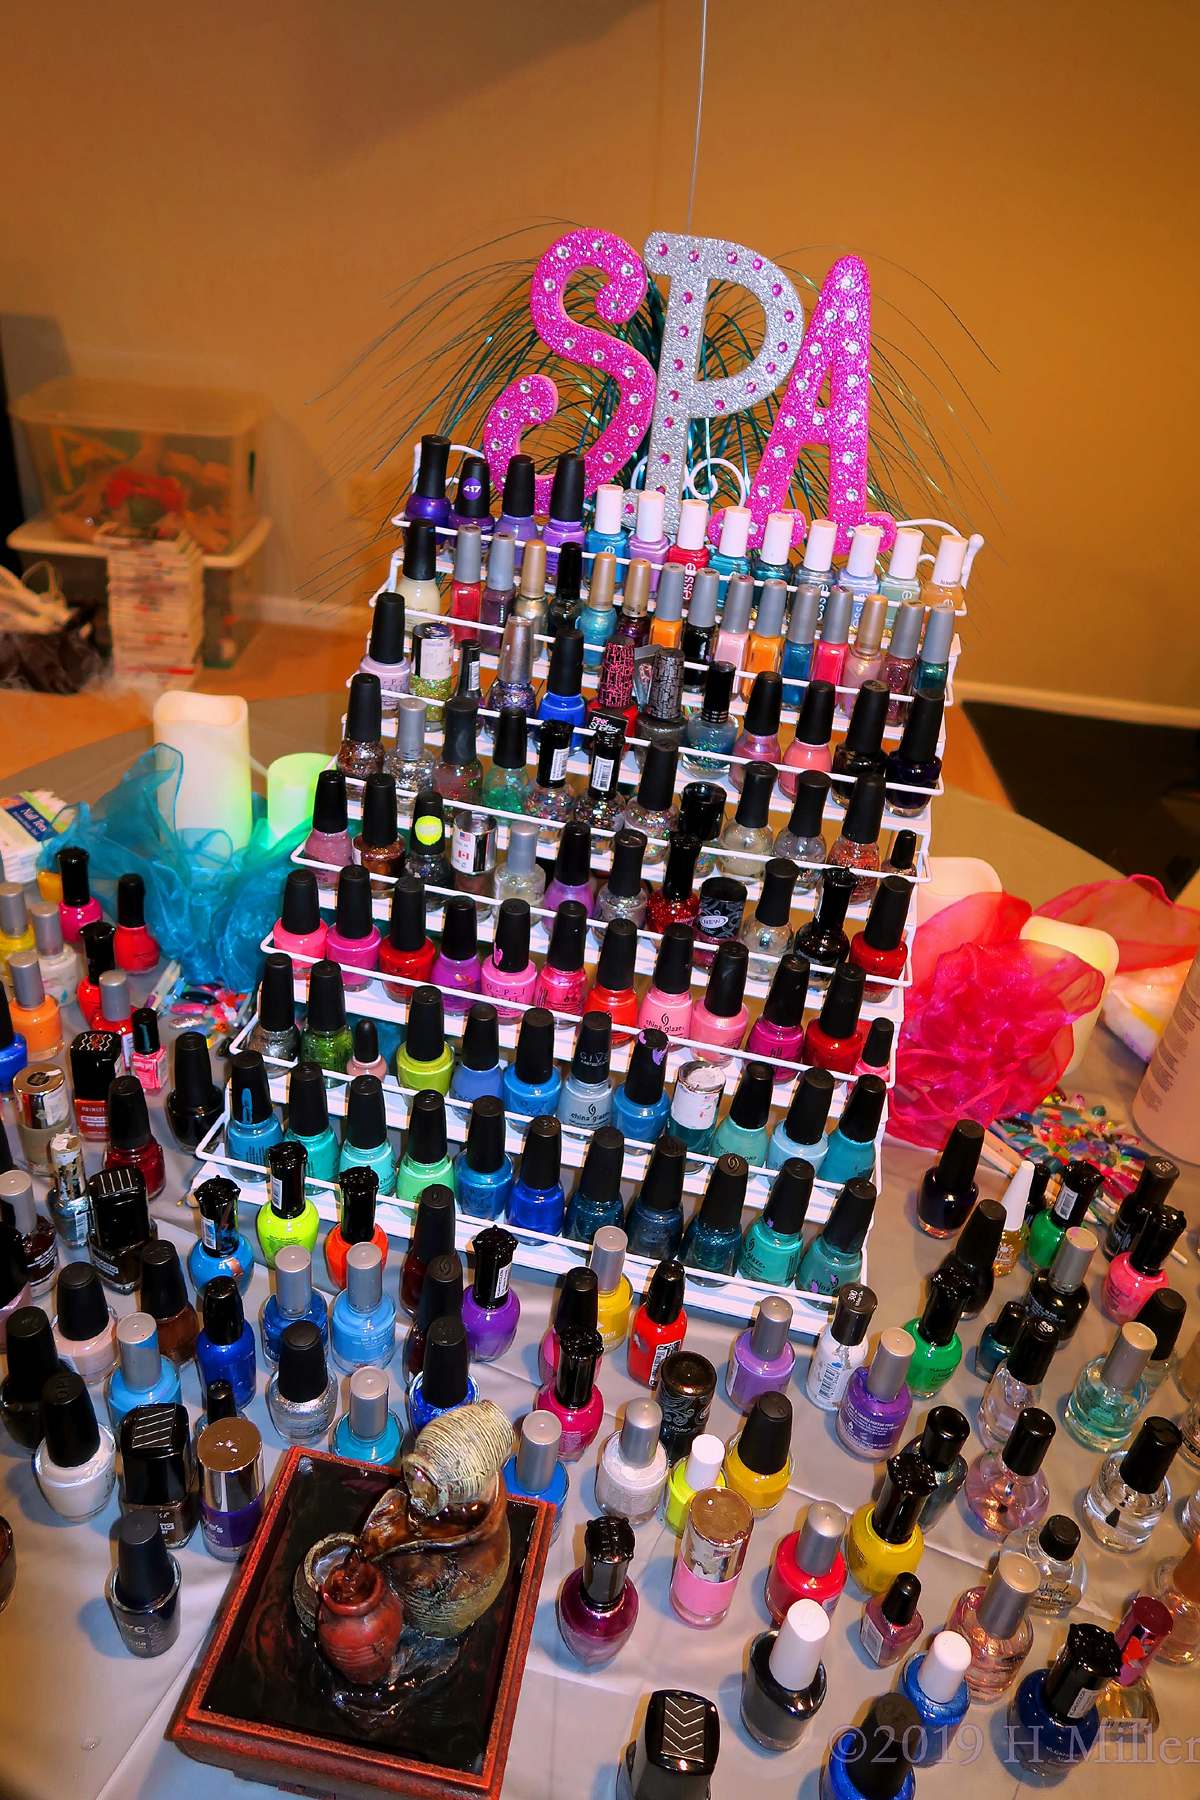 Amazing Nail Colors At The Kids Nail Salon For The Kids Spa Party!, 